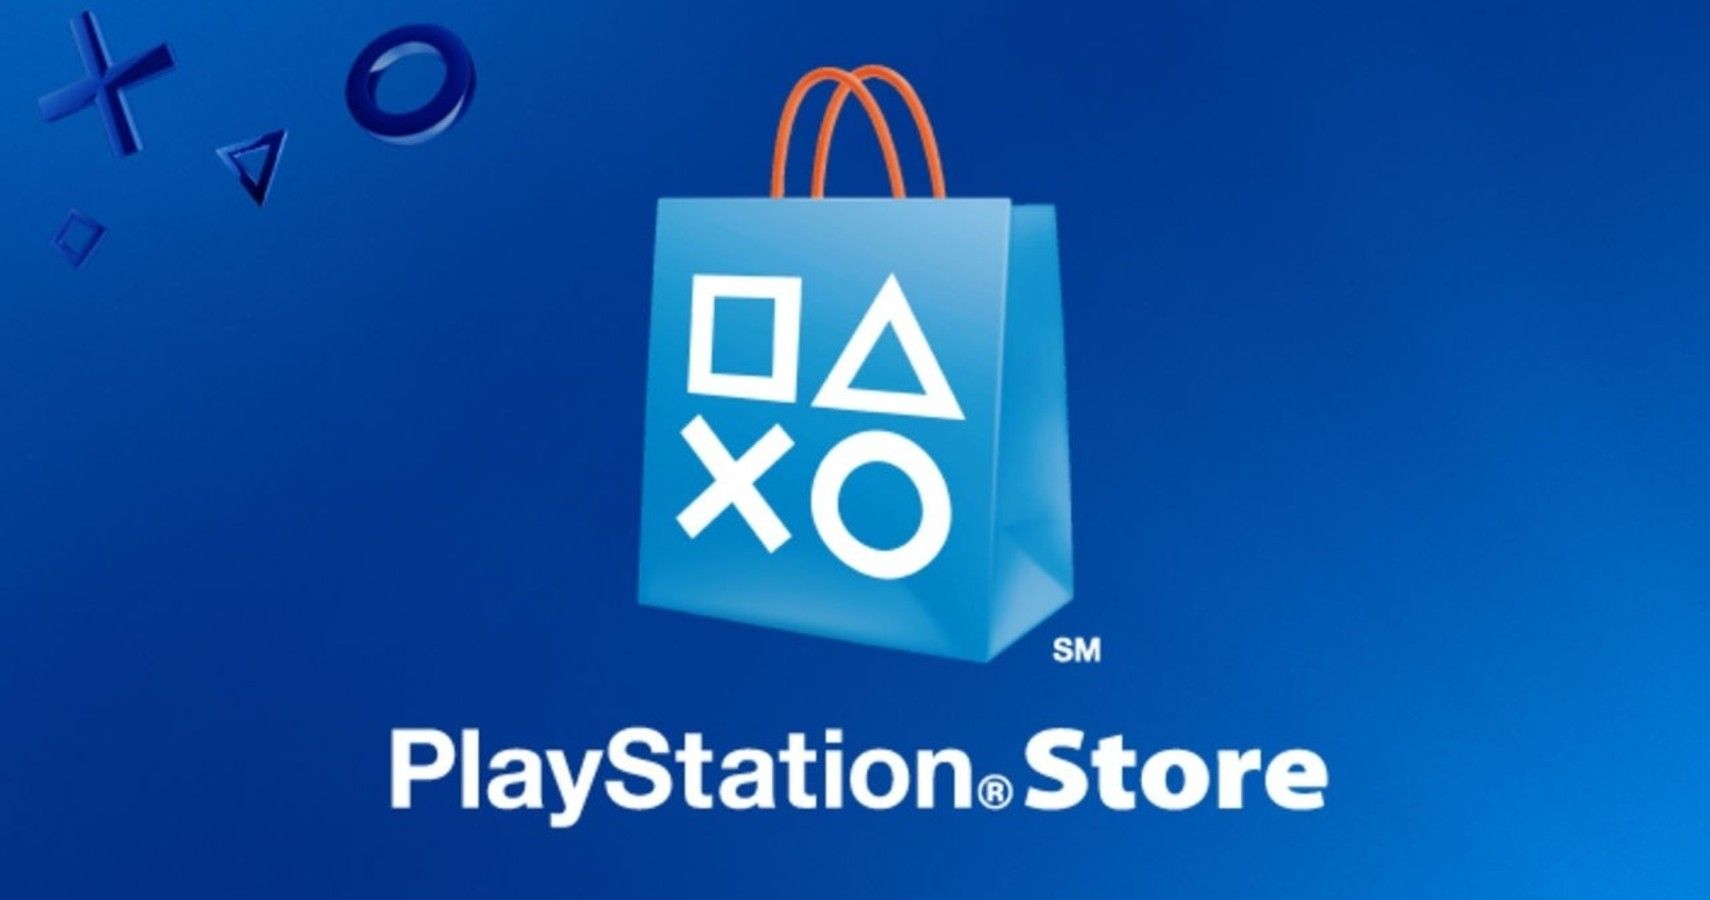 PlayStation Facing ClassAction Lawsuit Over Exclusivity Of Its Digital Sales